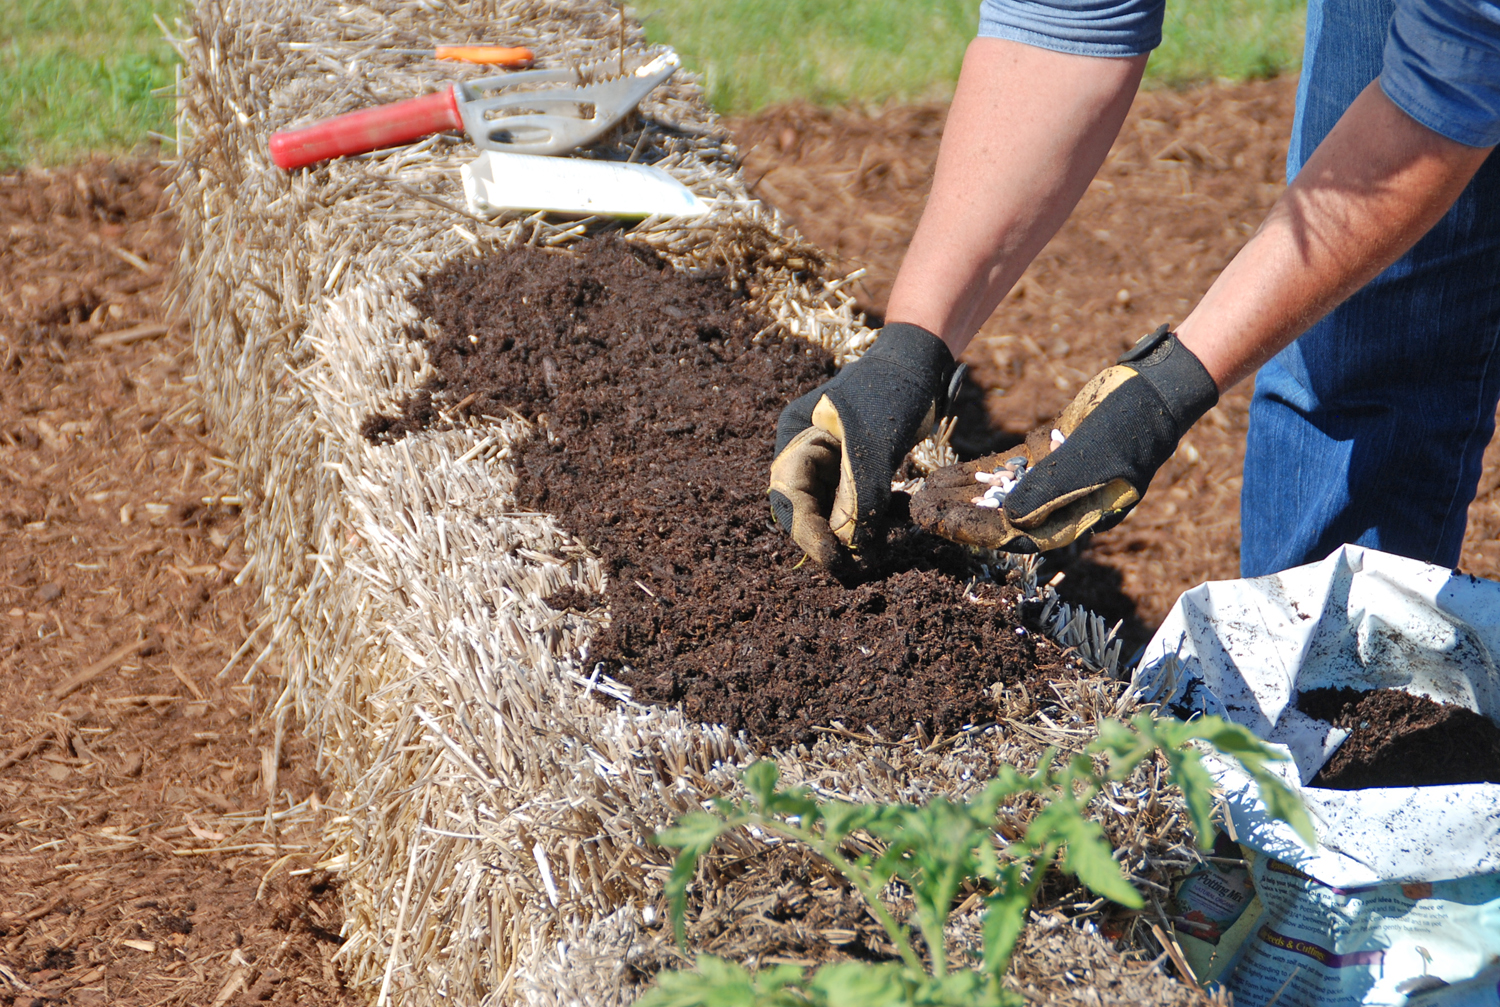 Create a planting bed for seeds by covering the straw bale with a one- to two-inch layer of planting mix.